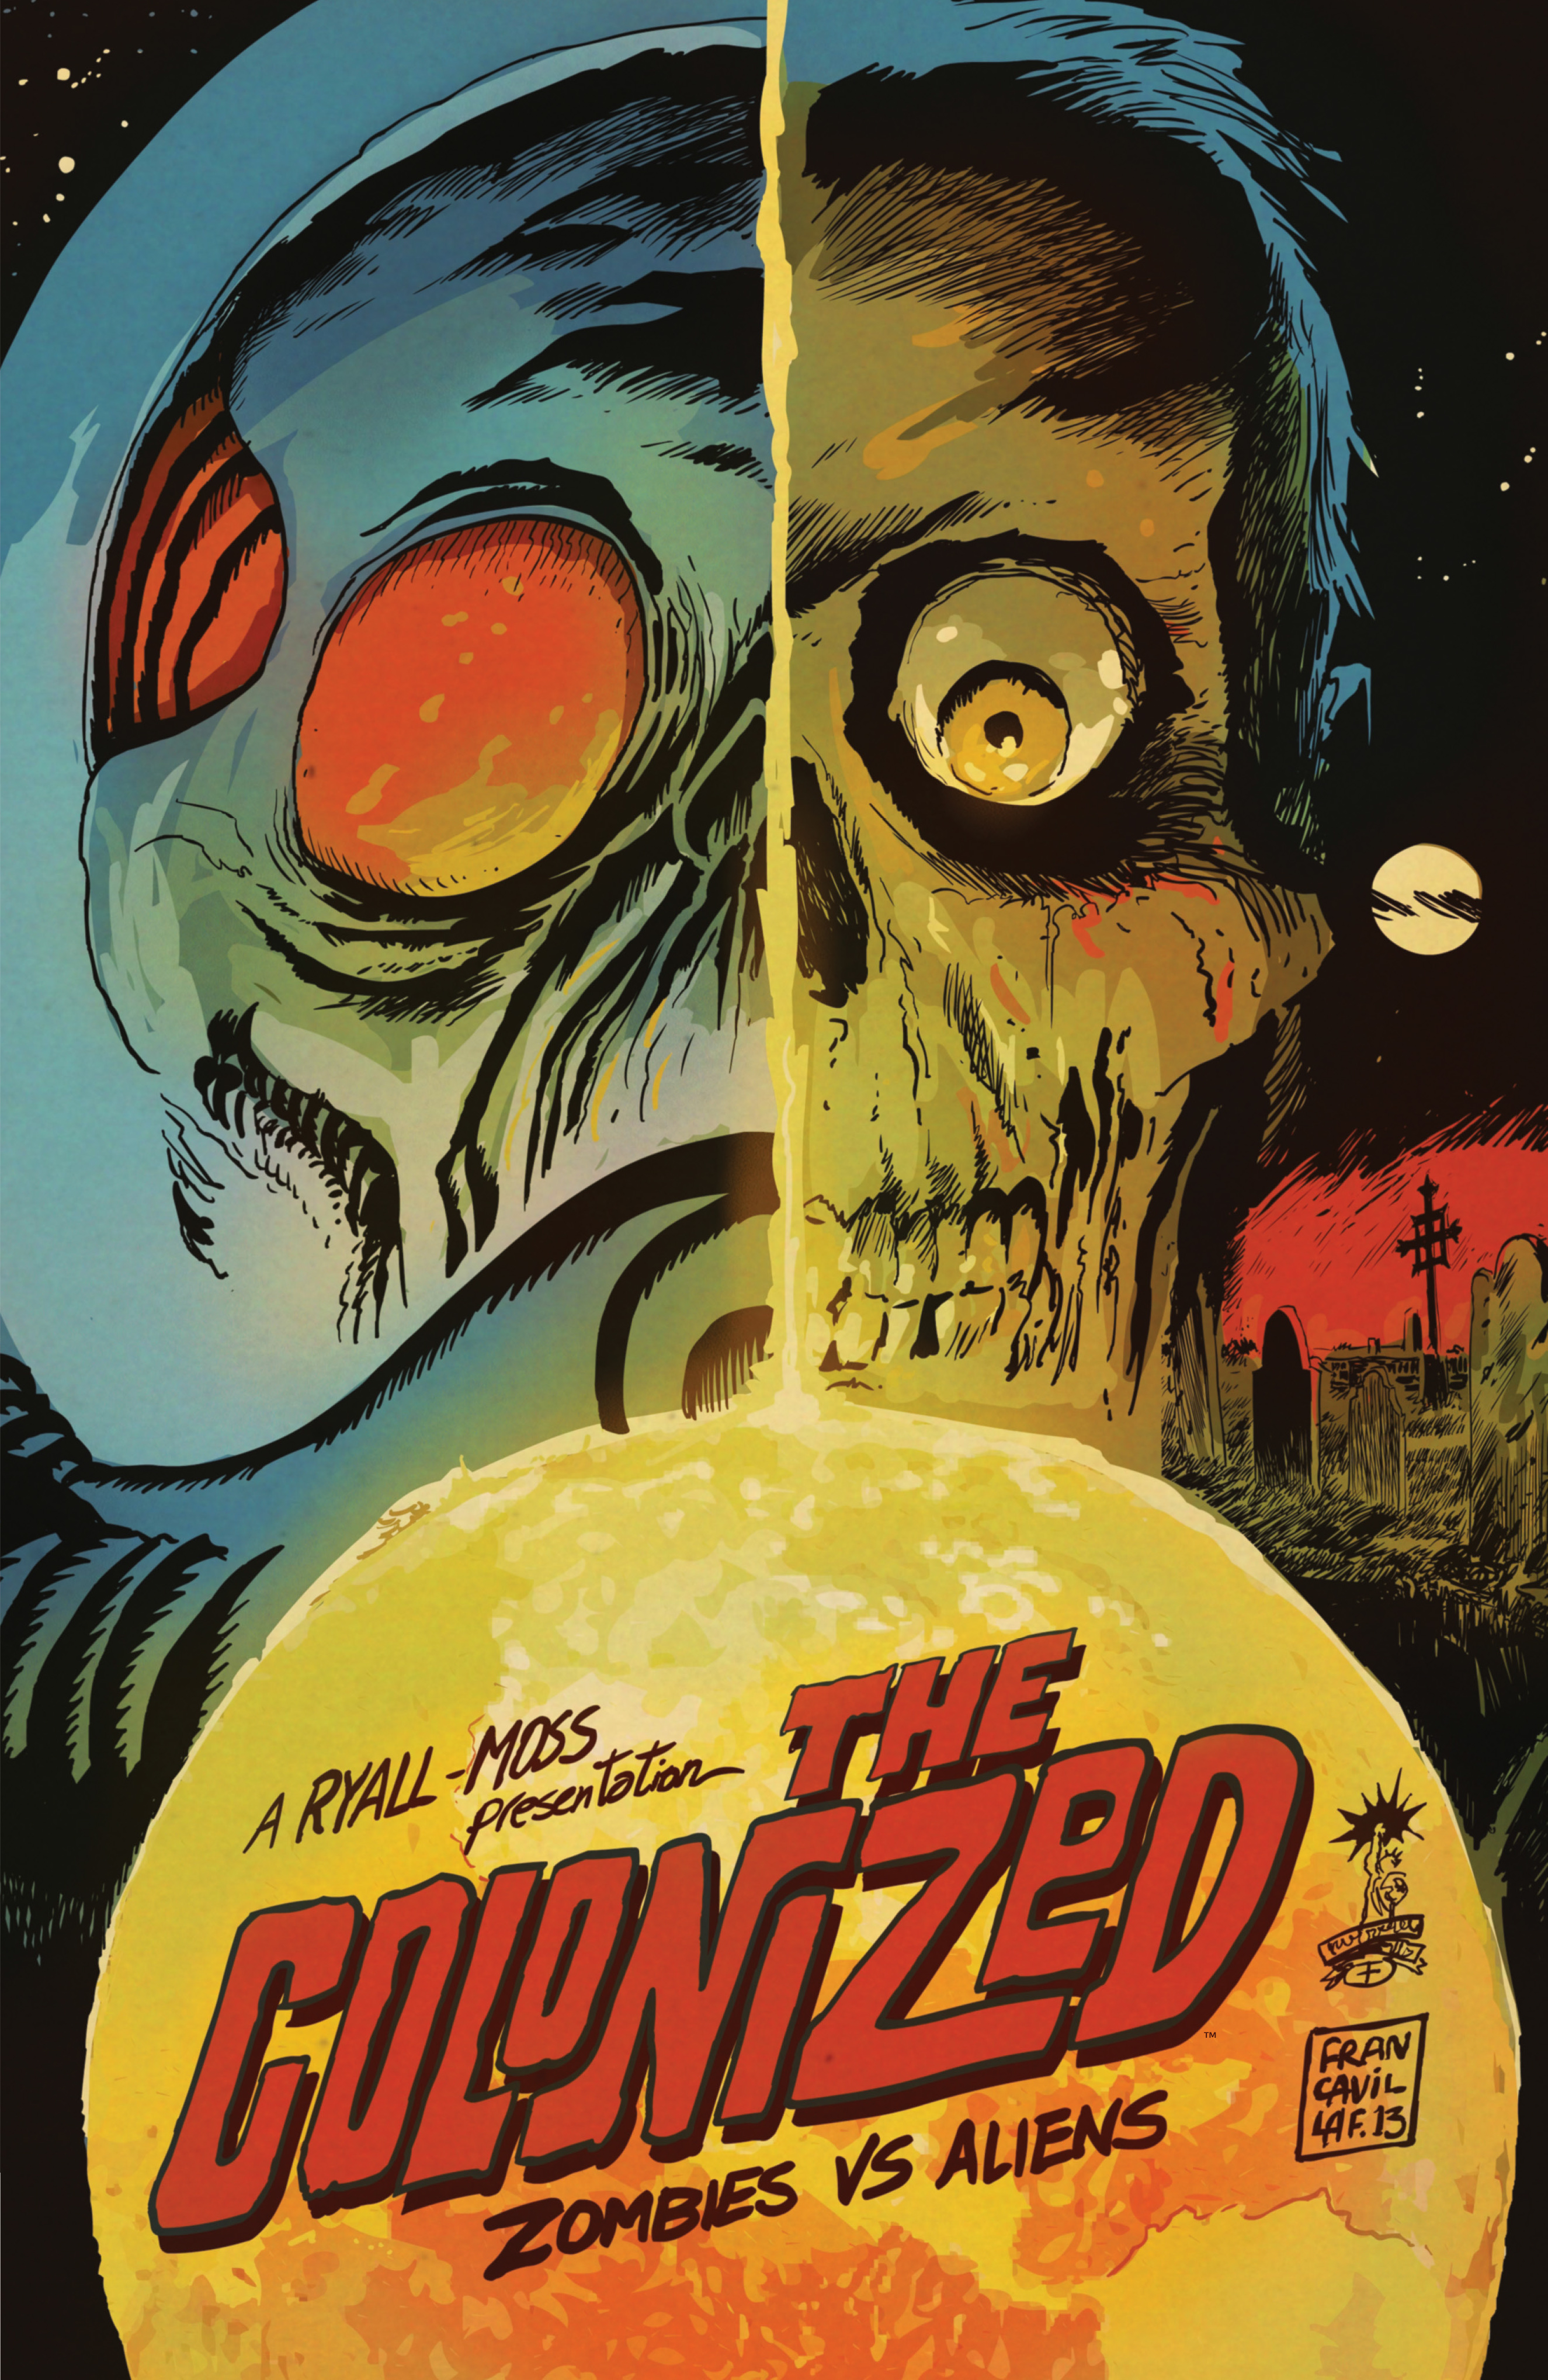 Read online The Colonized: Zombies vs. Aliens comic -  Issue # TPB - 1